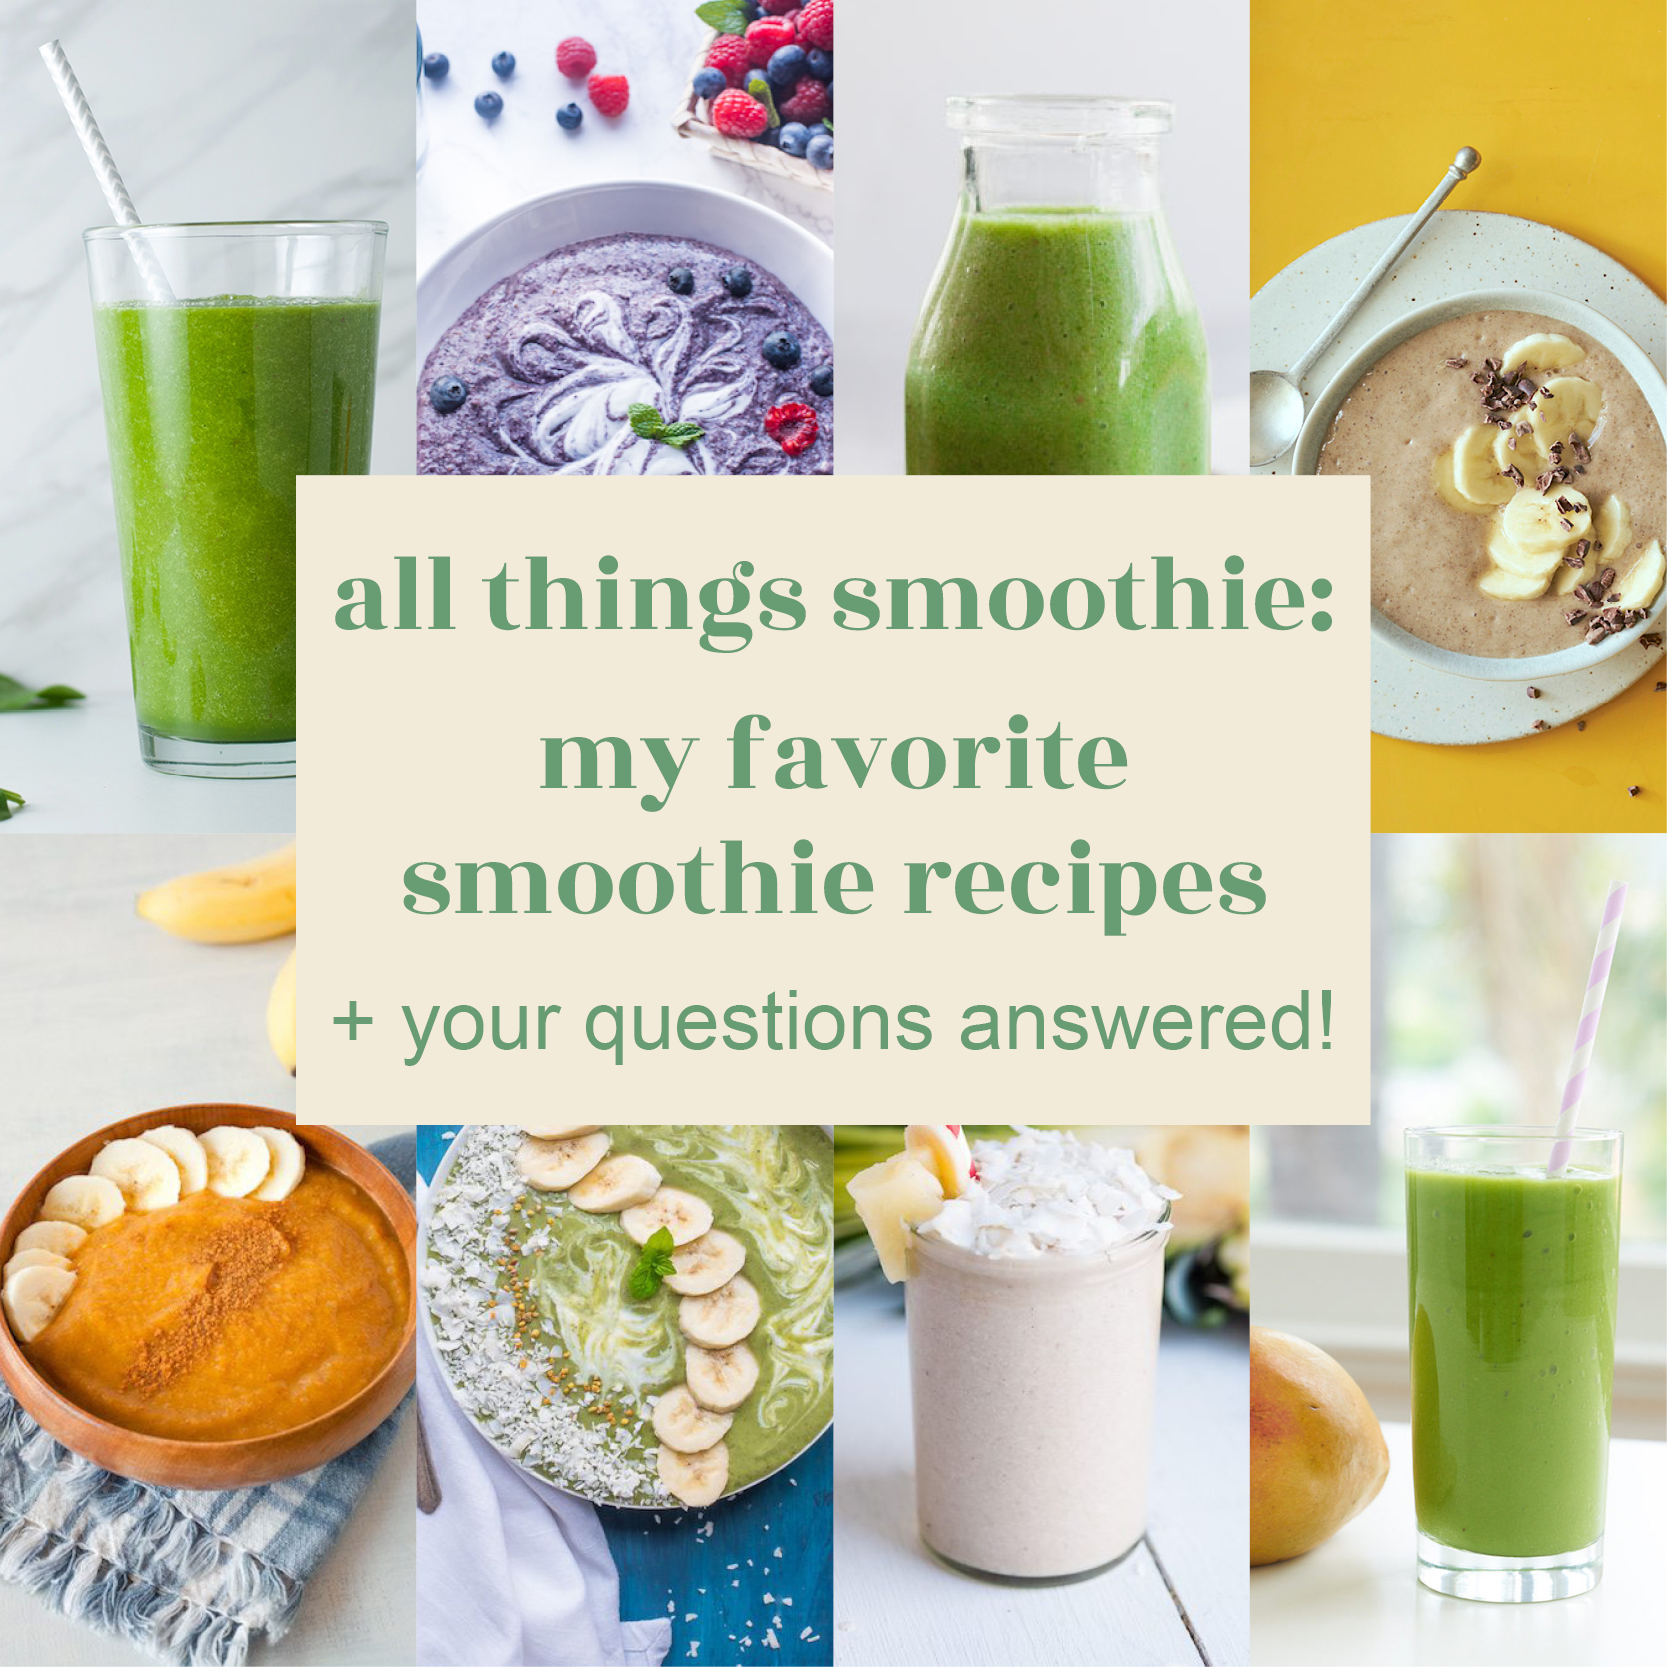 All Things Smoothie: My Favorite Smoothie Recipes + Your Questions Answered!